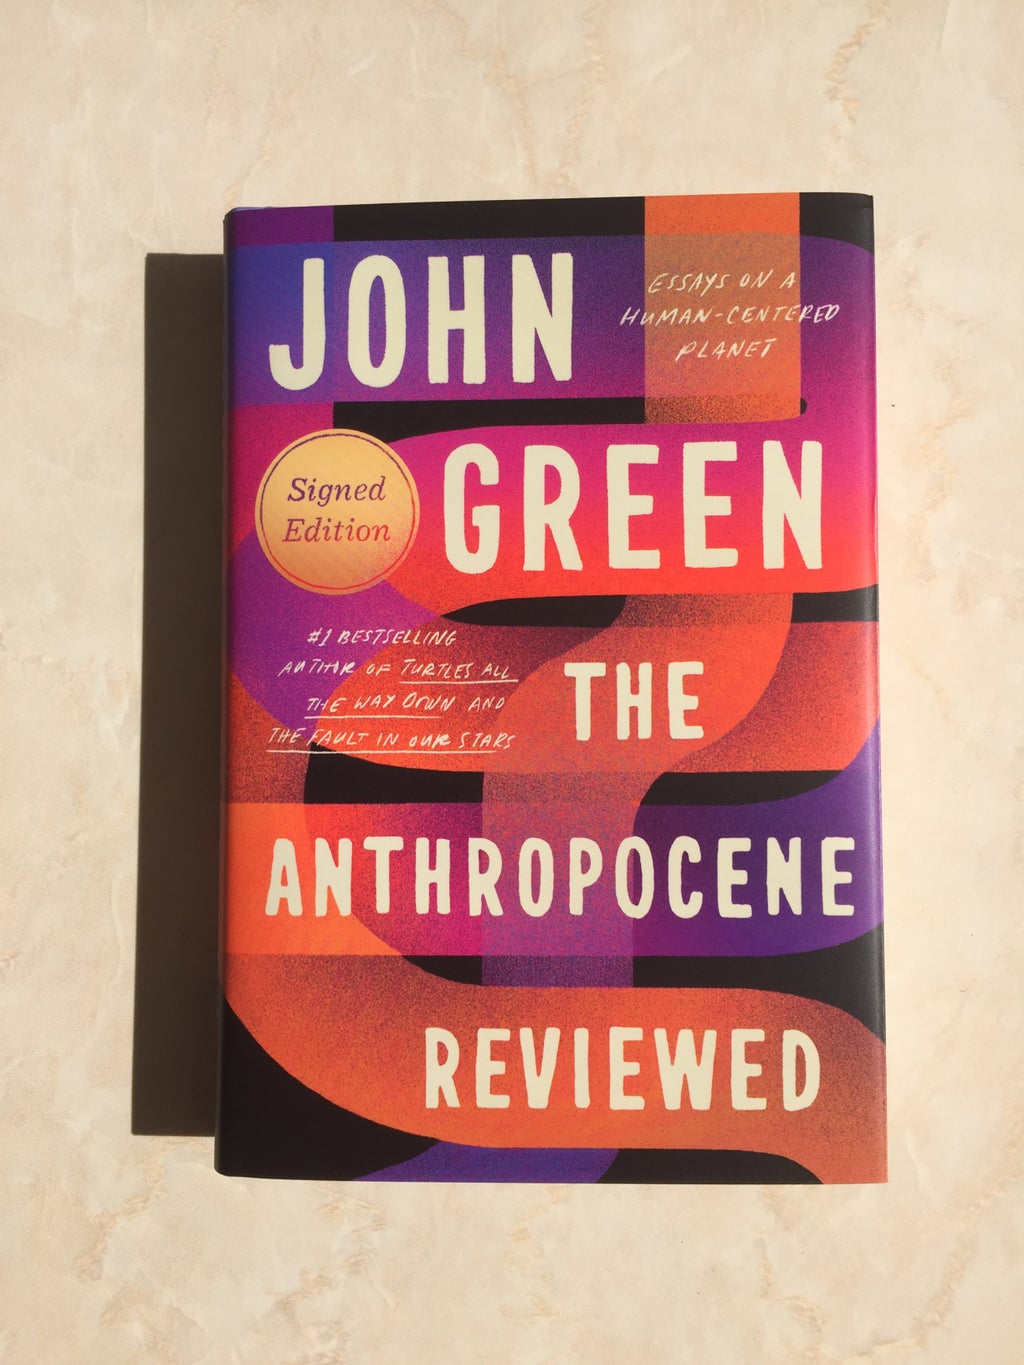 Picture of John Green\'s book \"The Anthropocene Reviewed\" against a plain backdrop